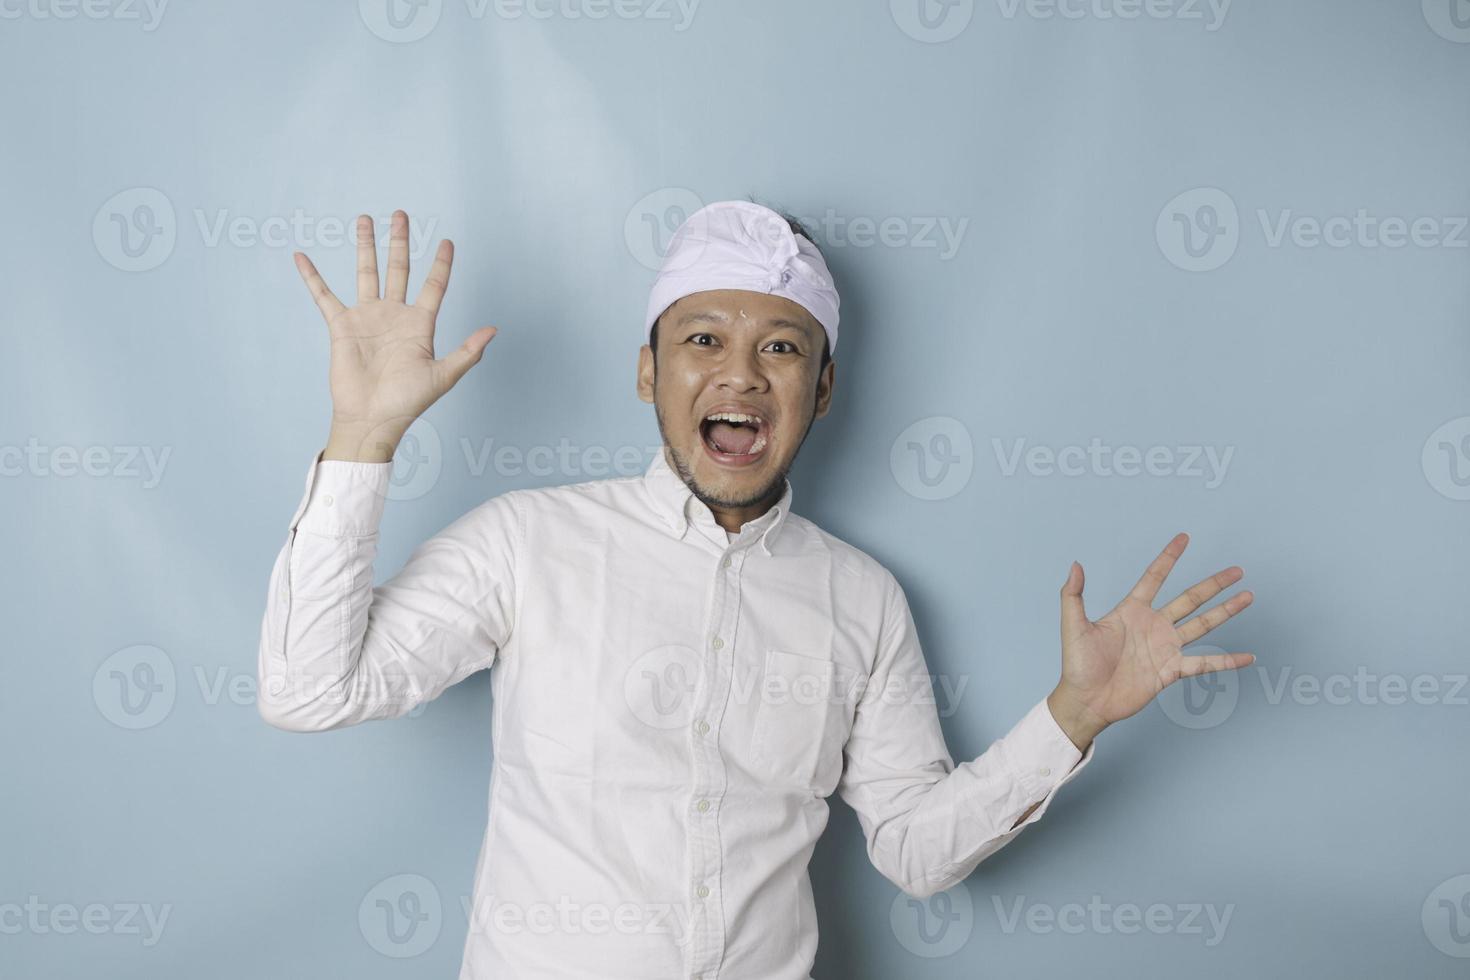 Surprised Balinese man wearing udeng or traditional headband and white shirt, isolated by blue background photo